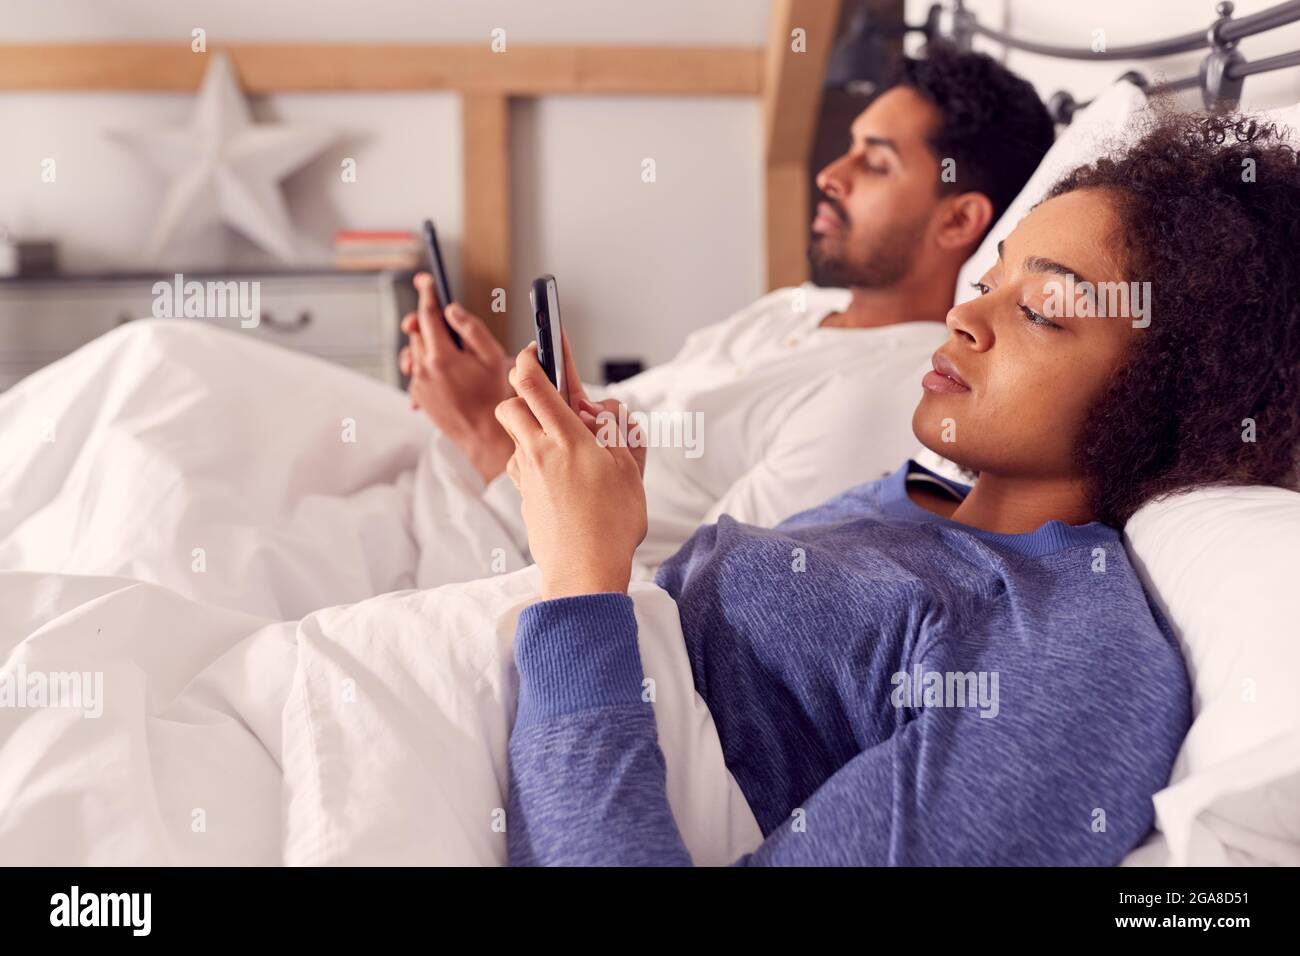 Couple In Wearing Pyjamas Addicted To Using Mobile Phones Lying In Bed And Not Communicating Stock Photo